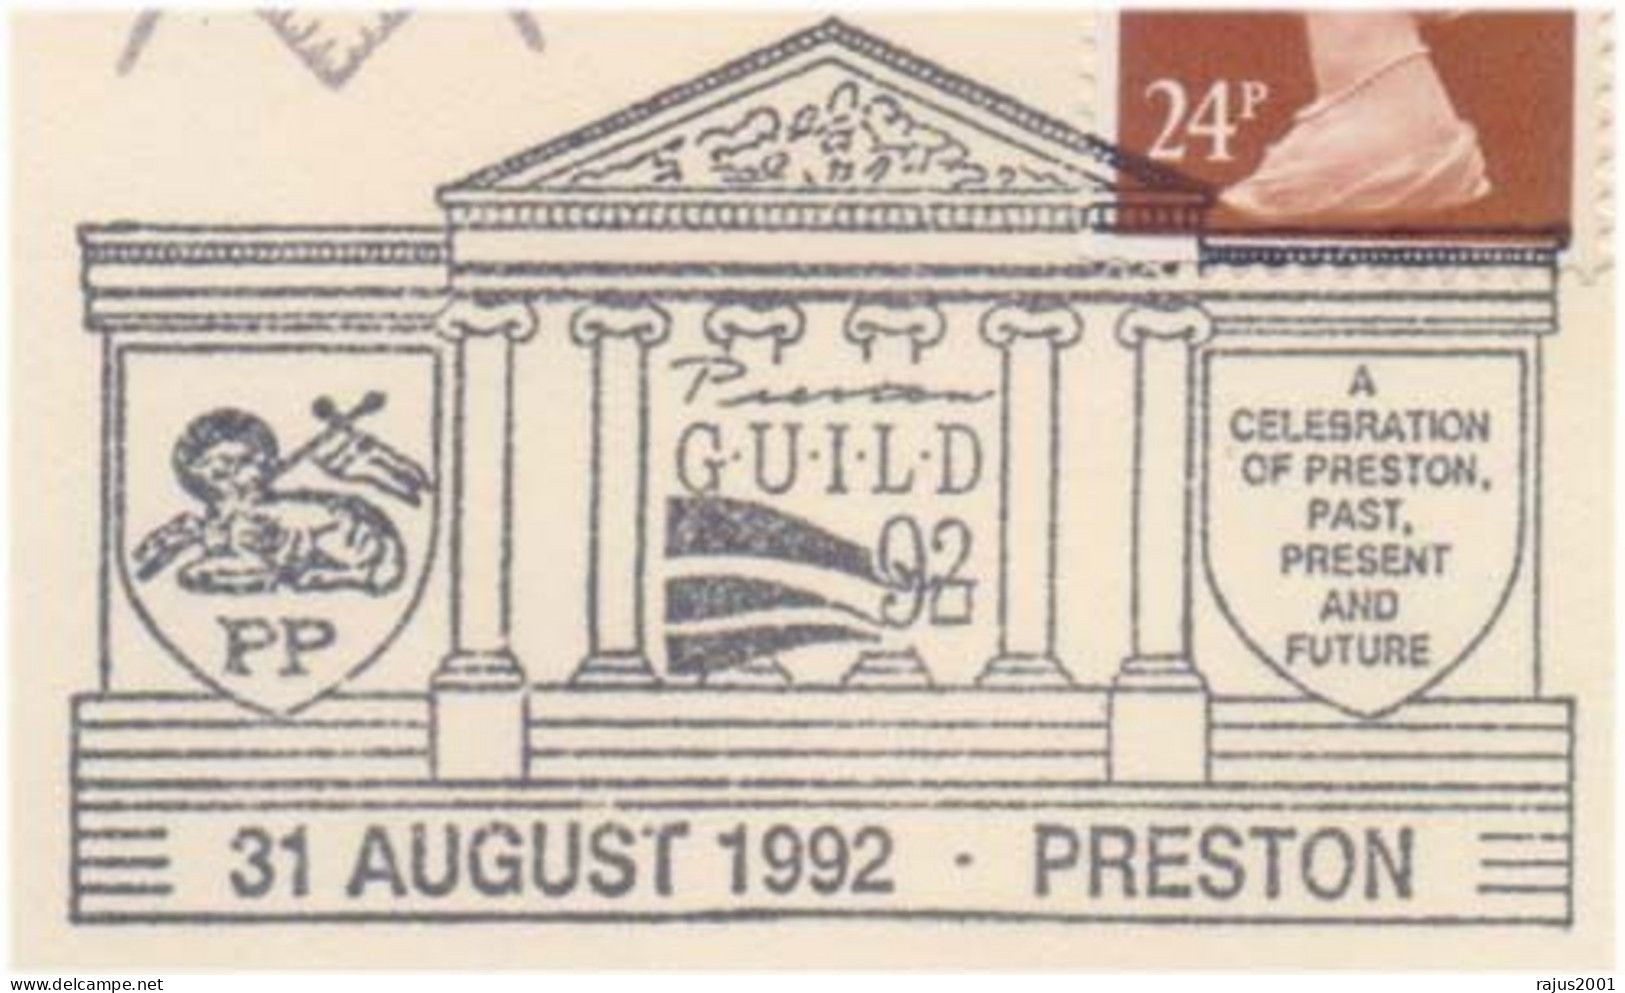 Masonic Temple Saul St. Preston Guild Lodge No 4408, Freemasonry, Masonic, Limited Only 90 Cover Made With Signed - Franc-Maçonnerie